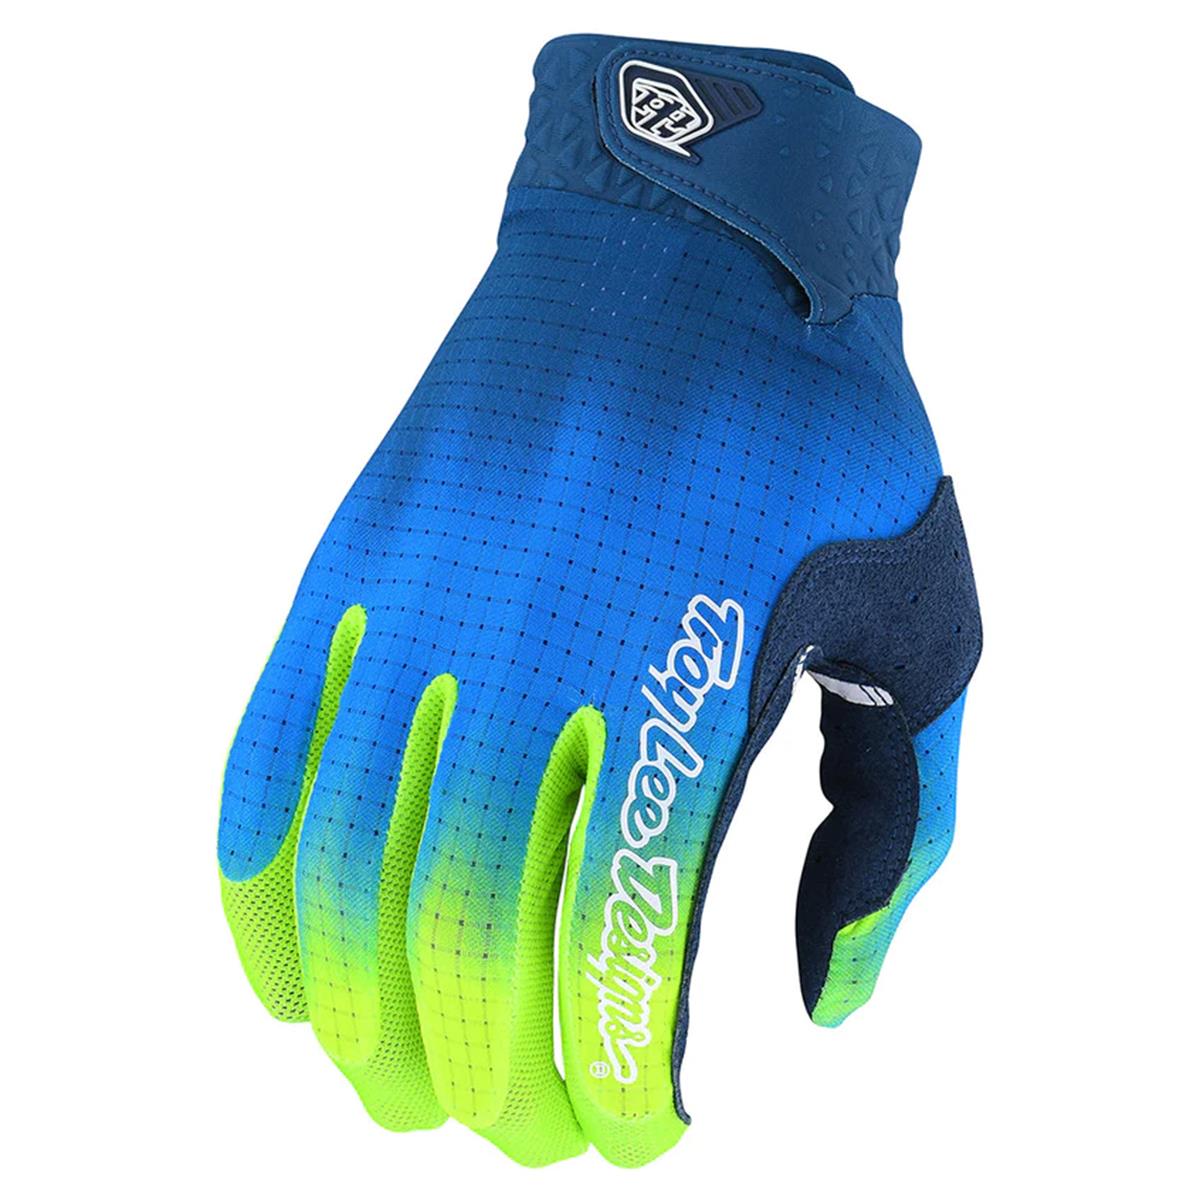 Troy Lee Air Race Gloves - Jet Fuel Navy/Yellow X Large